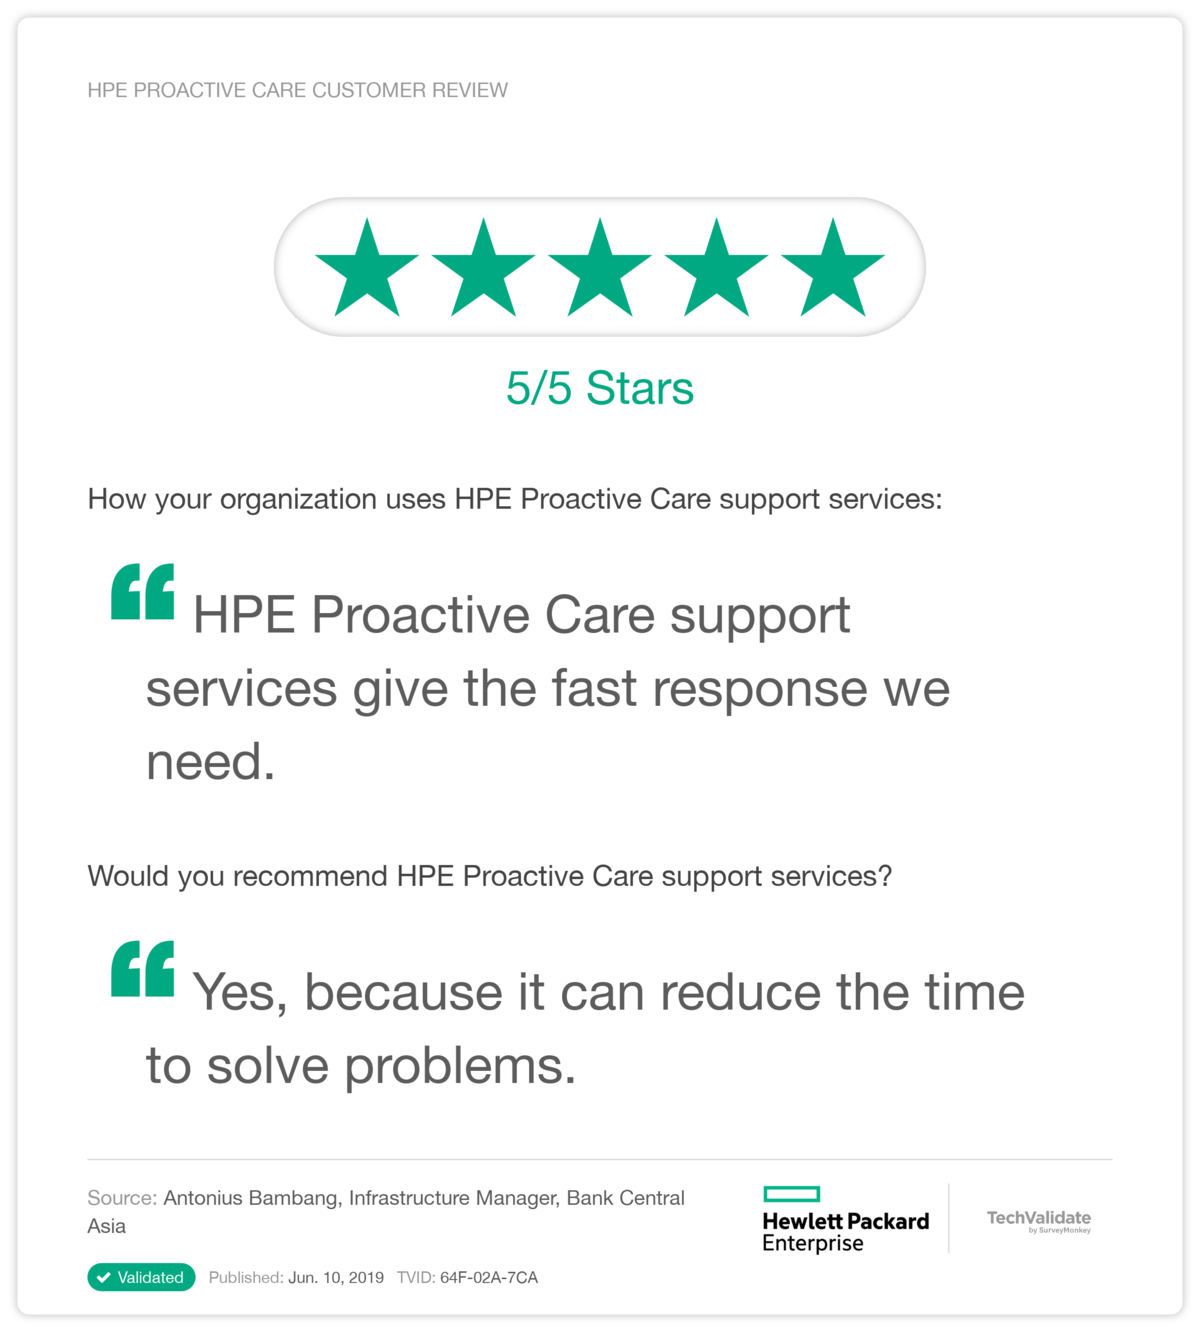 HPE Proactive Care Customer Review